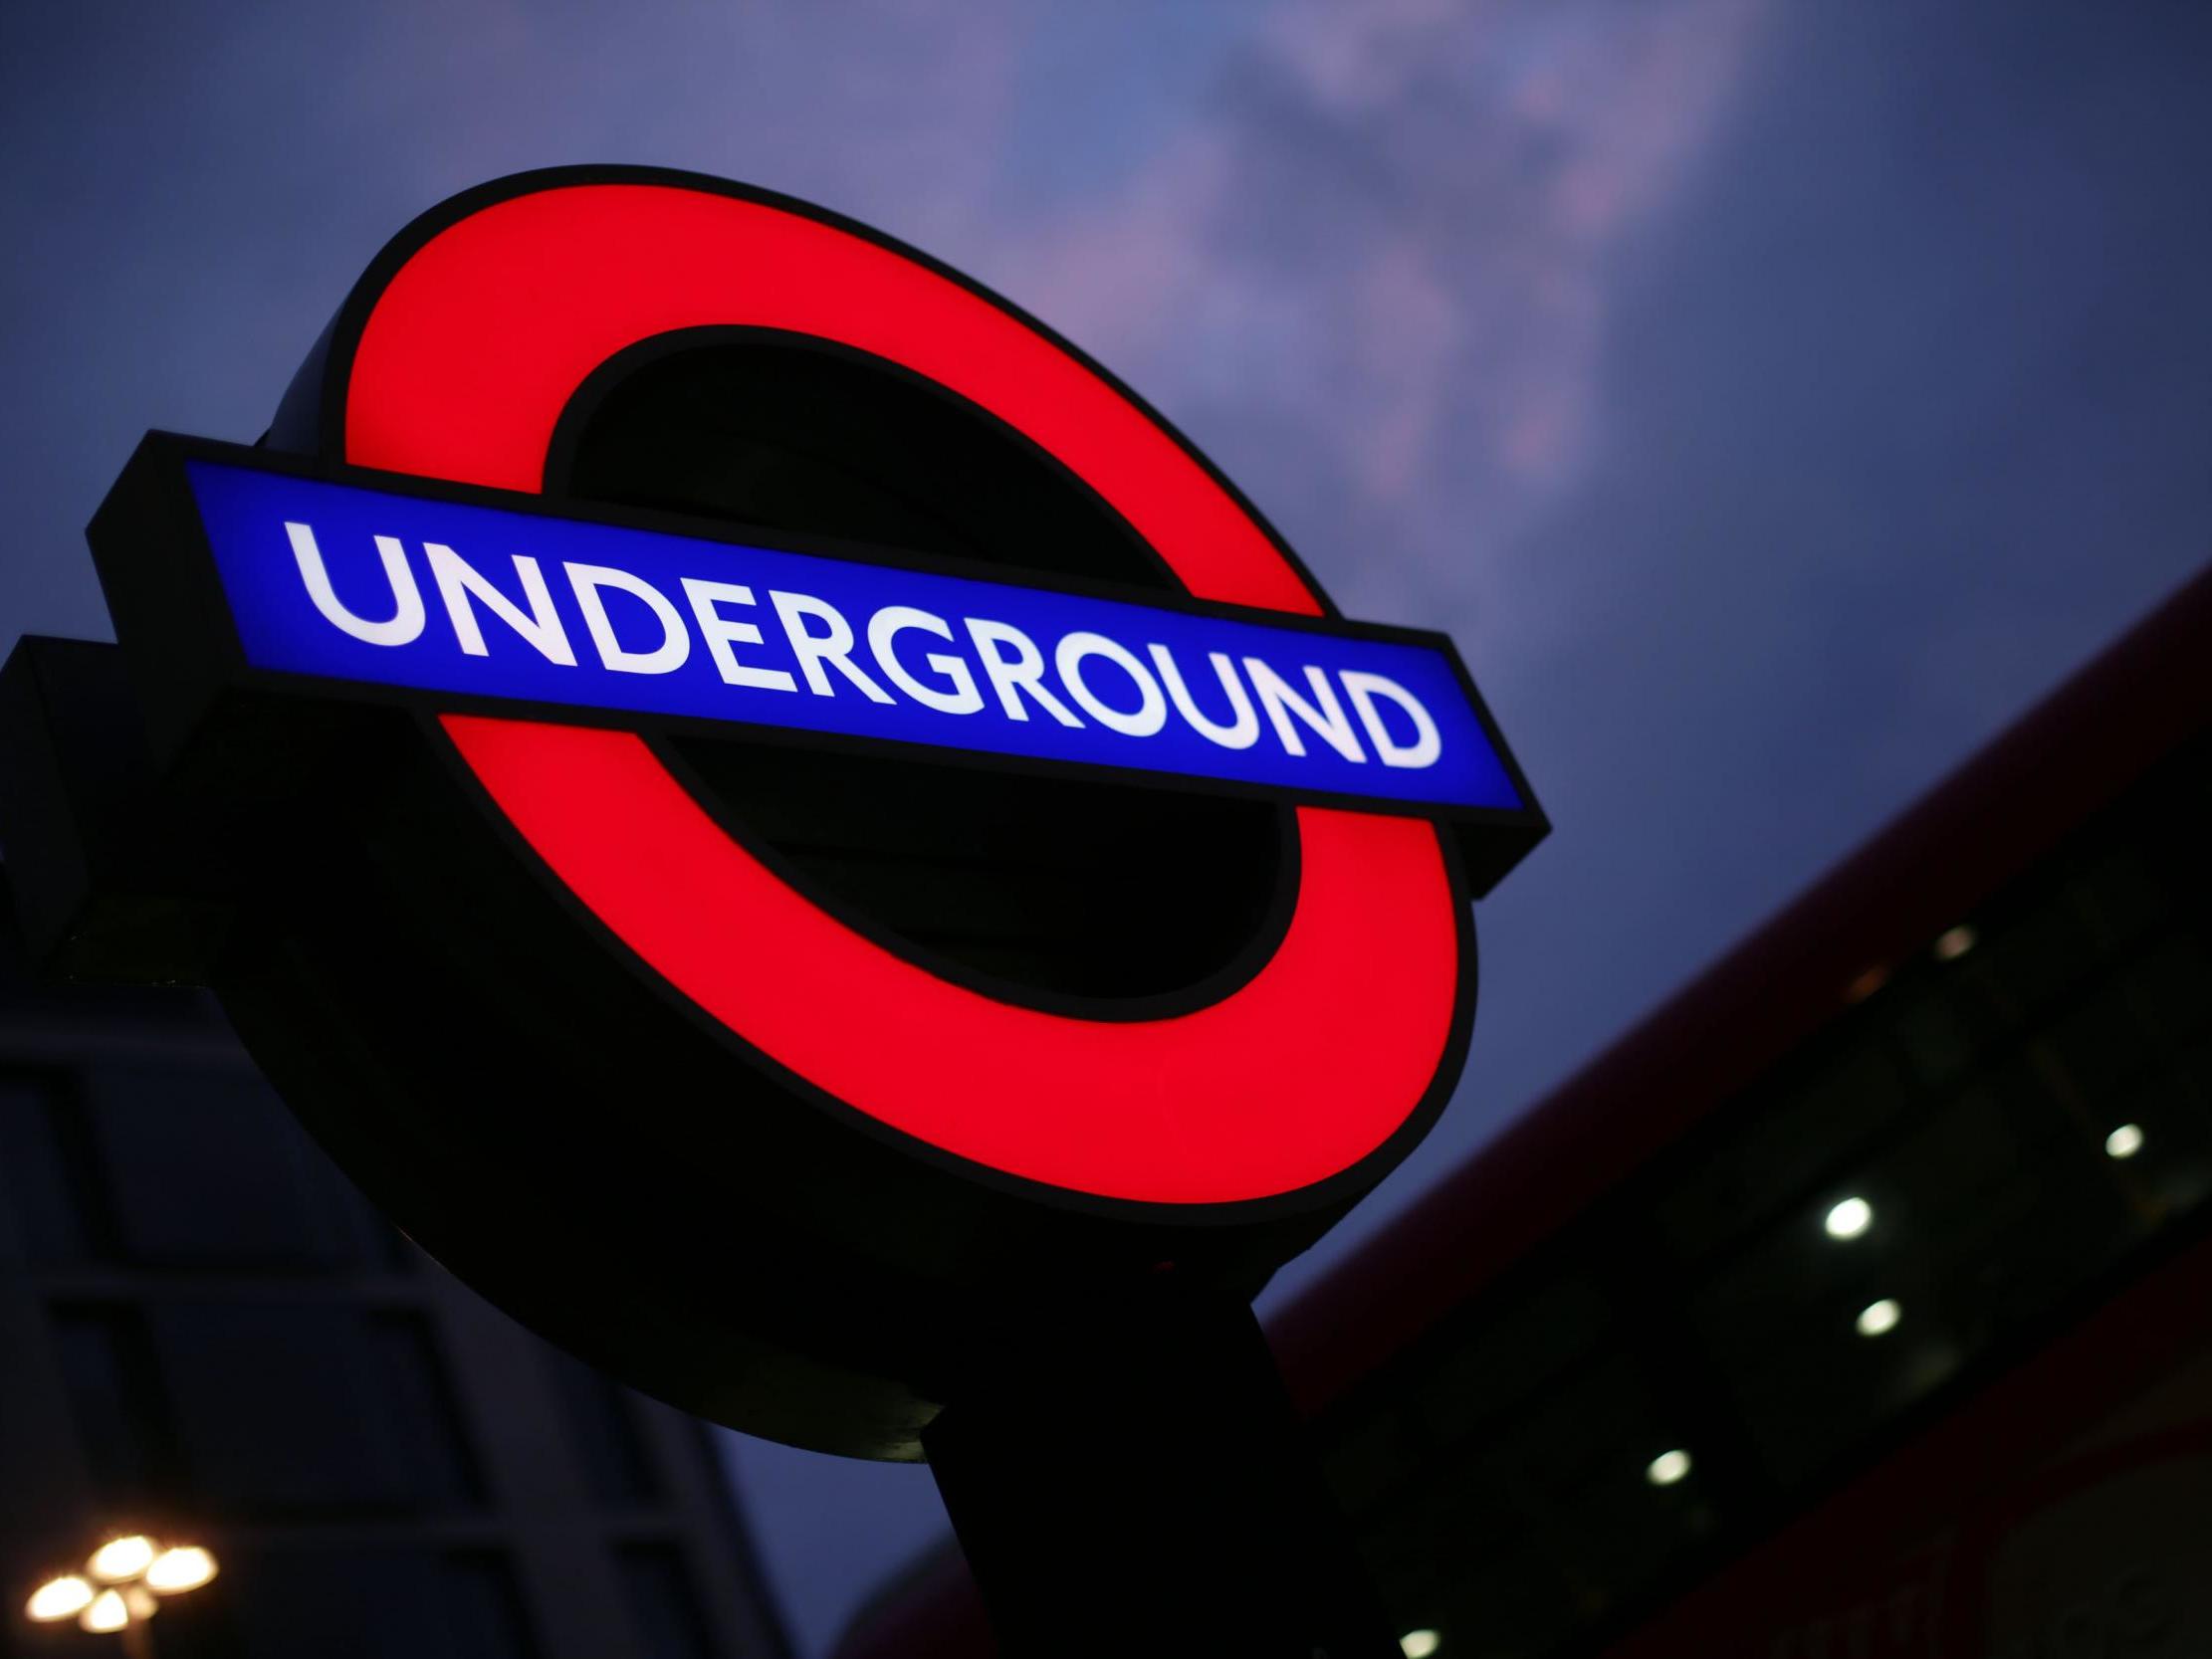 James Froomberg sexually assaulted a young woman on a London Underground train